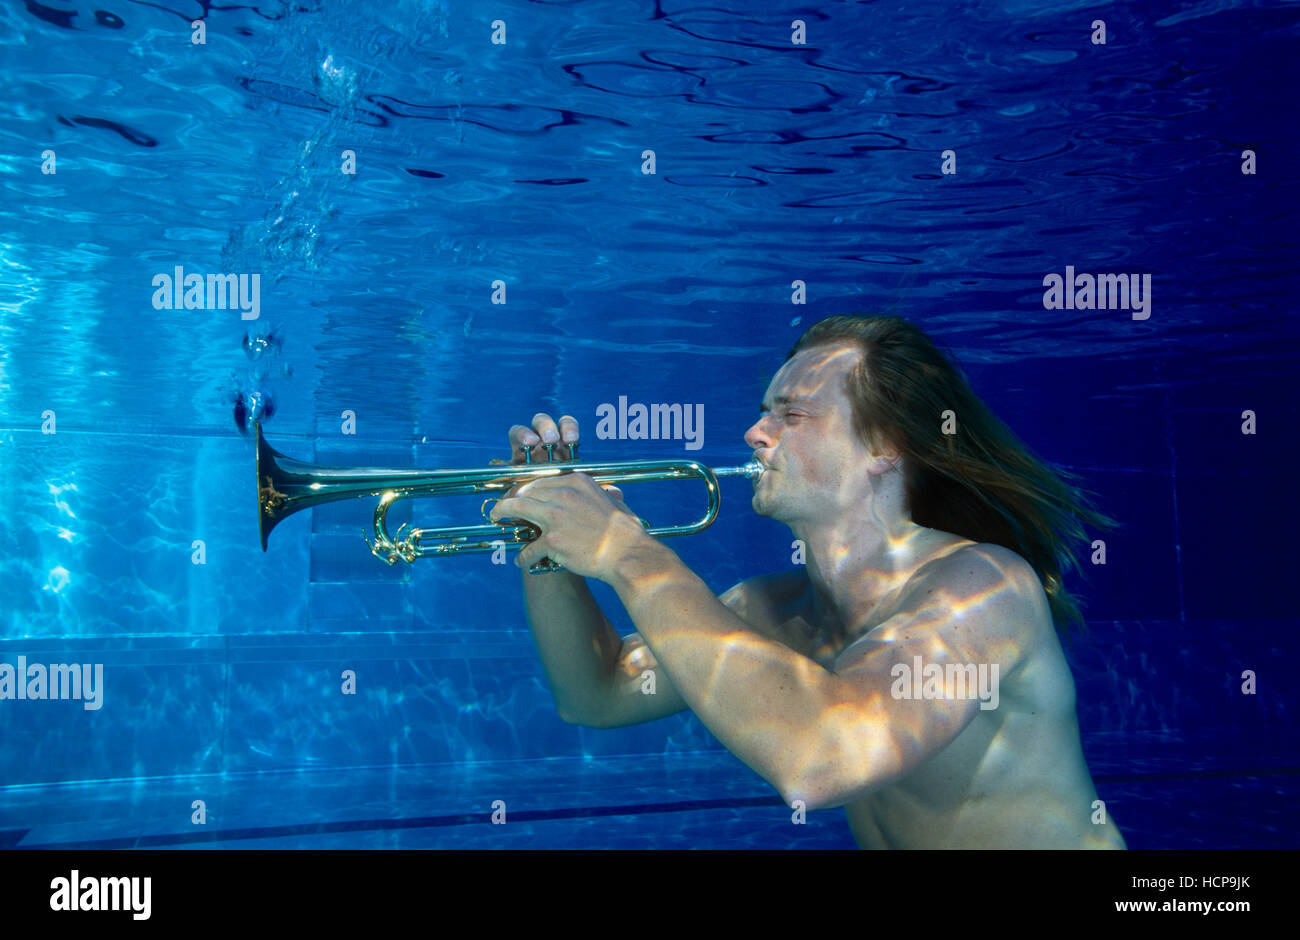 Musician playing trumpet under water Stock Photo